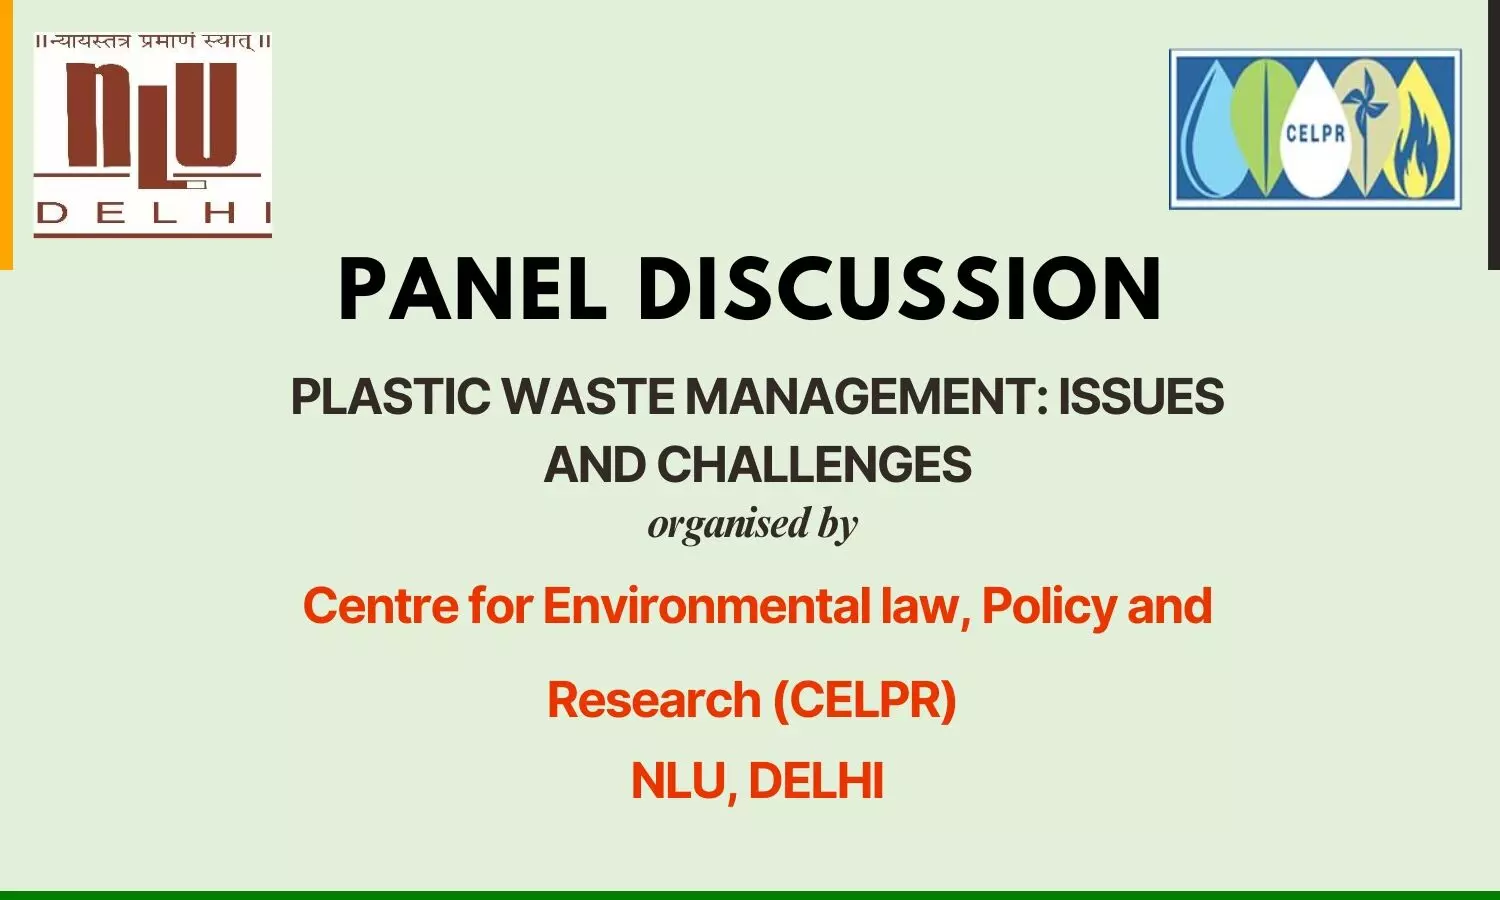 Panel Discussion on Plastic Waste Management: Issues and Challenges | CELPR NLU Delhi